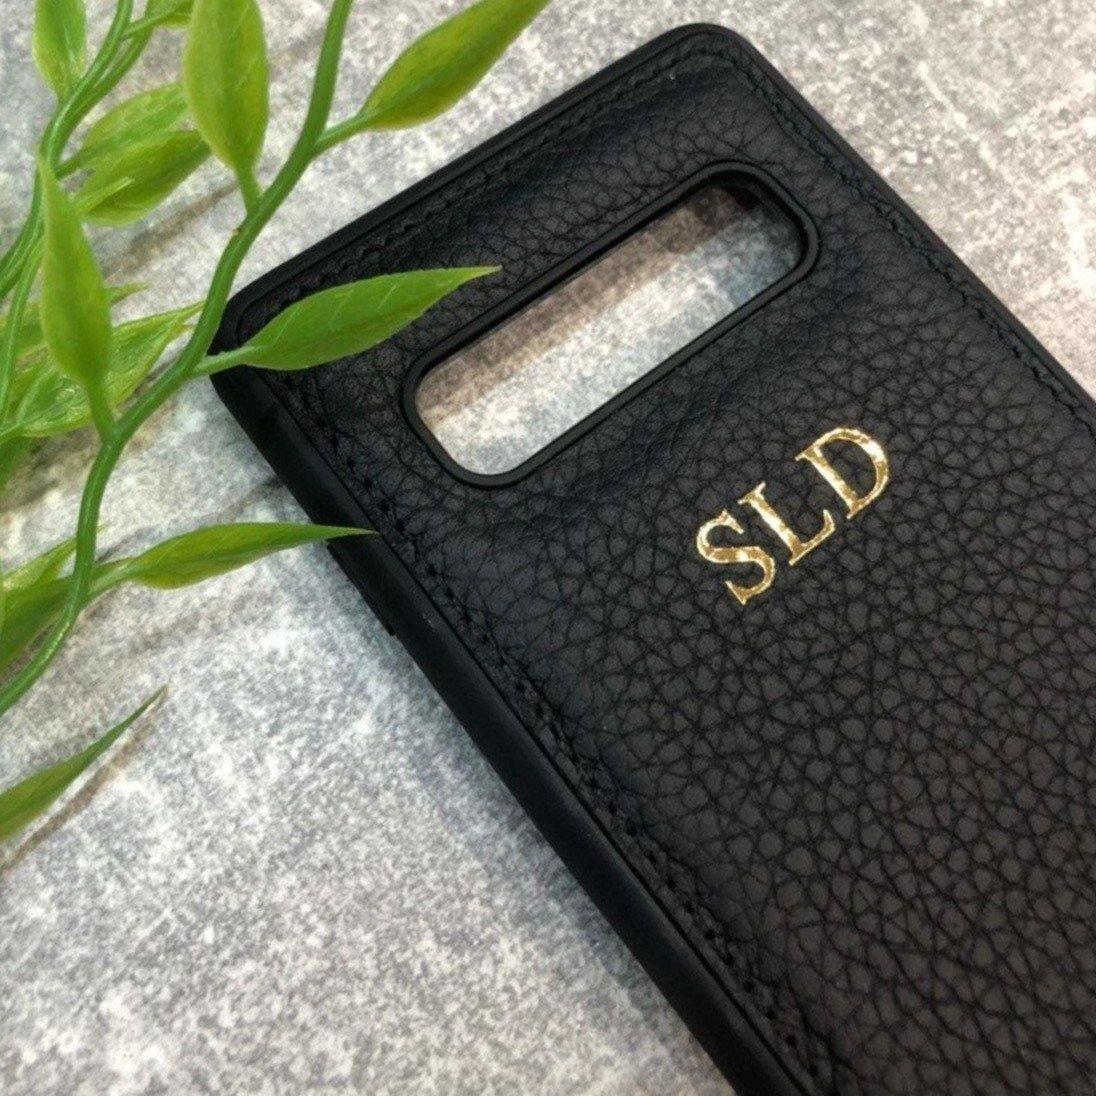 Samsung S10 leather phone case personalised with name or initials - PersonalisebyLisa